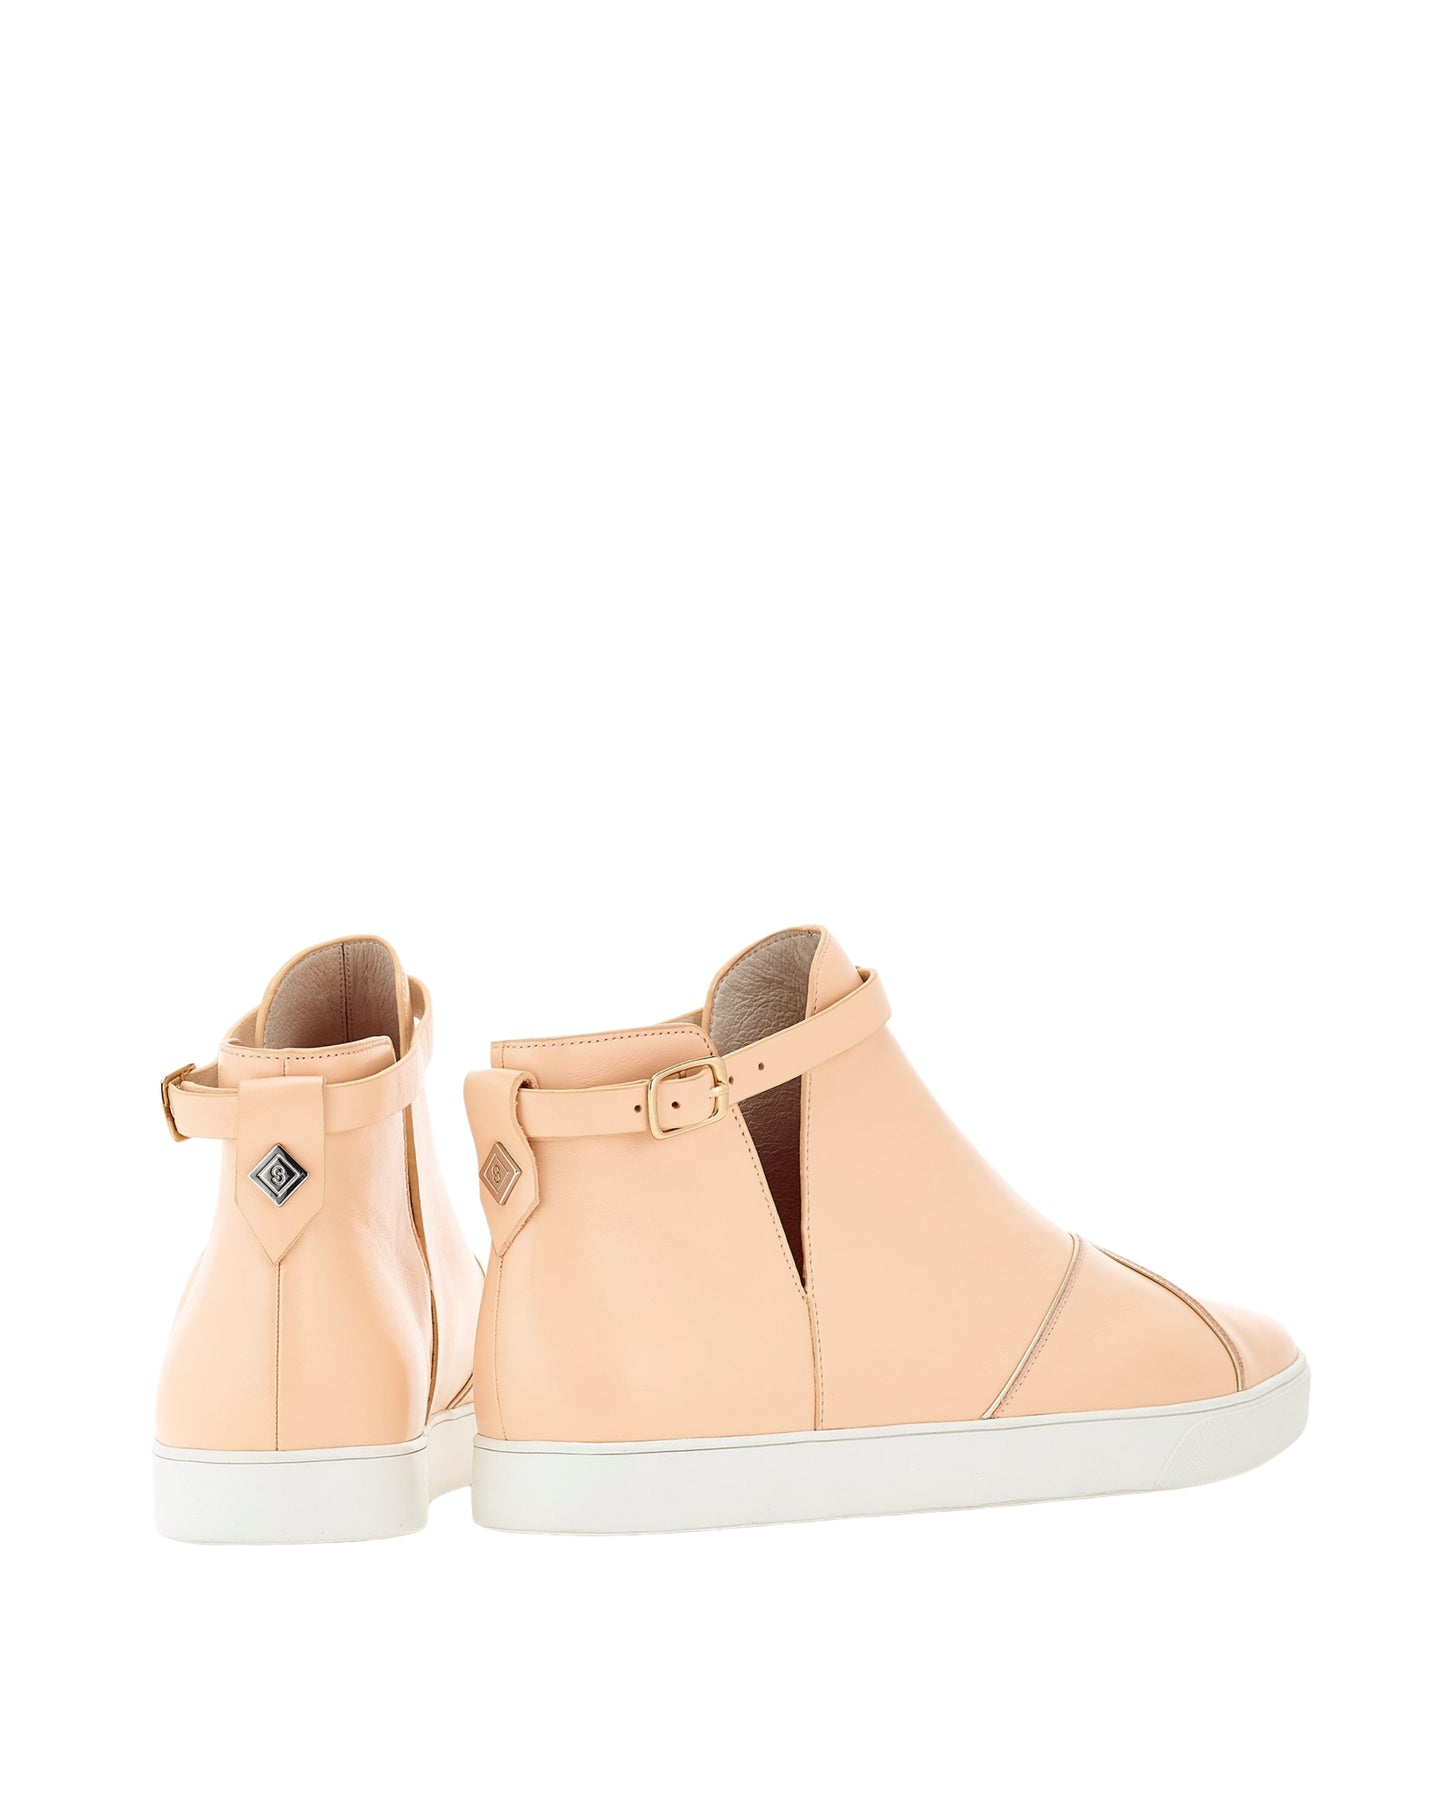 Luxury women's leather bootie sneaker - THE OUTSIDER – Cocktail Sneakers